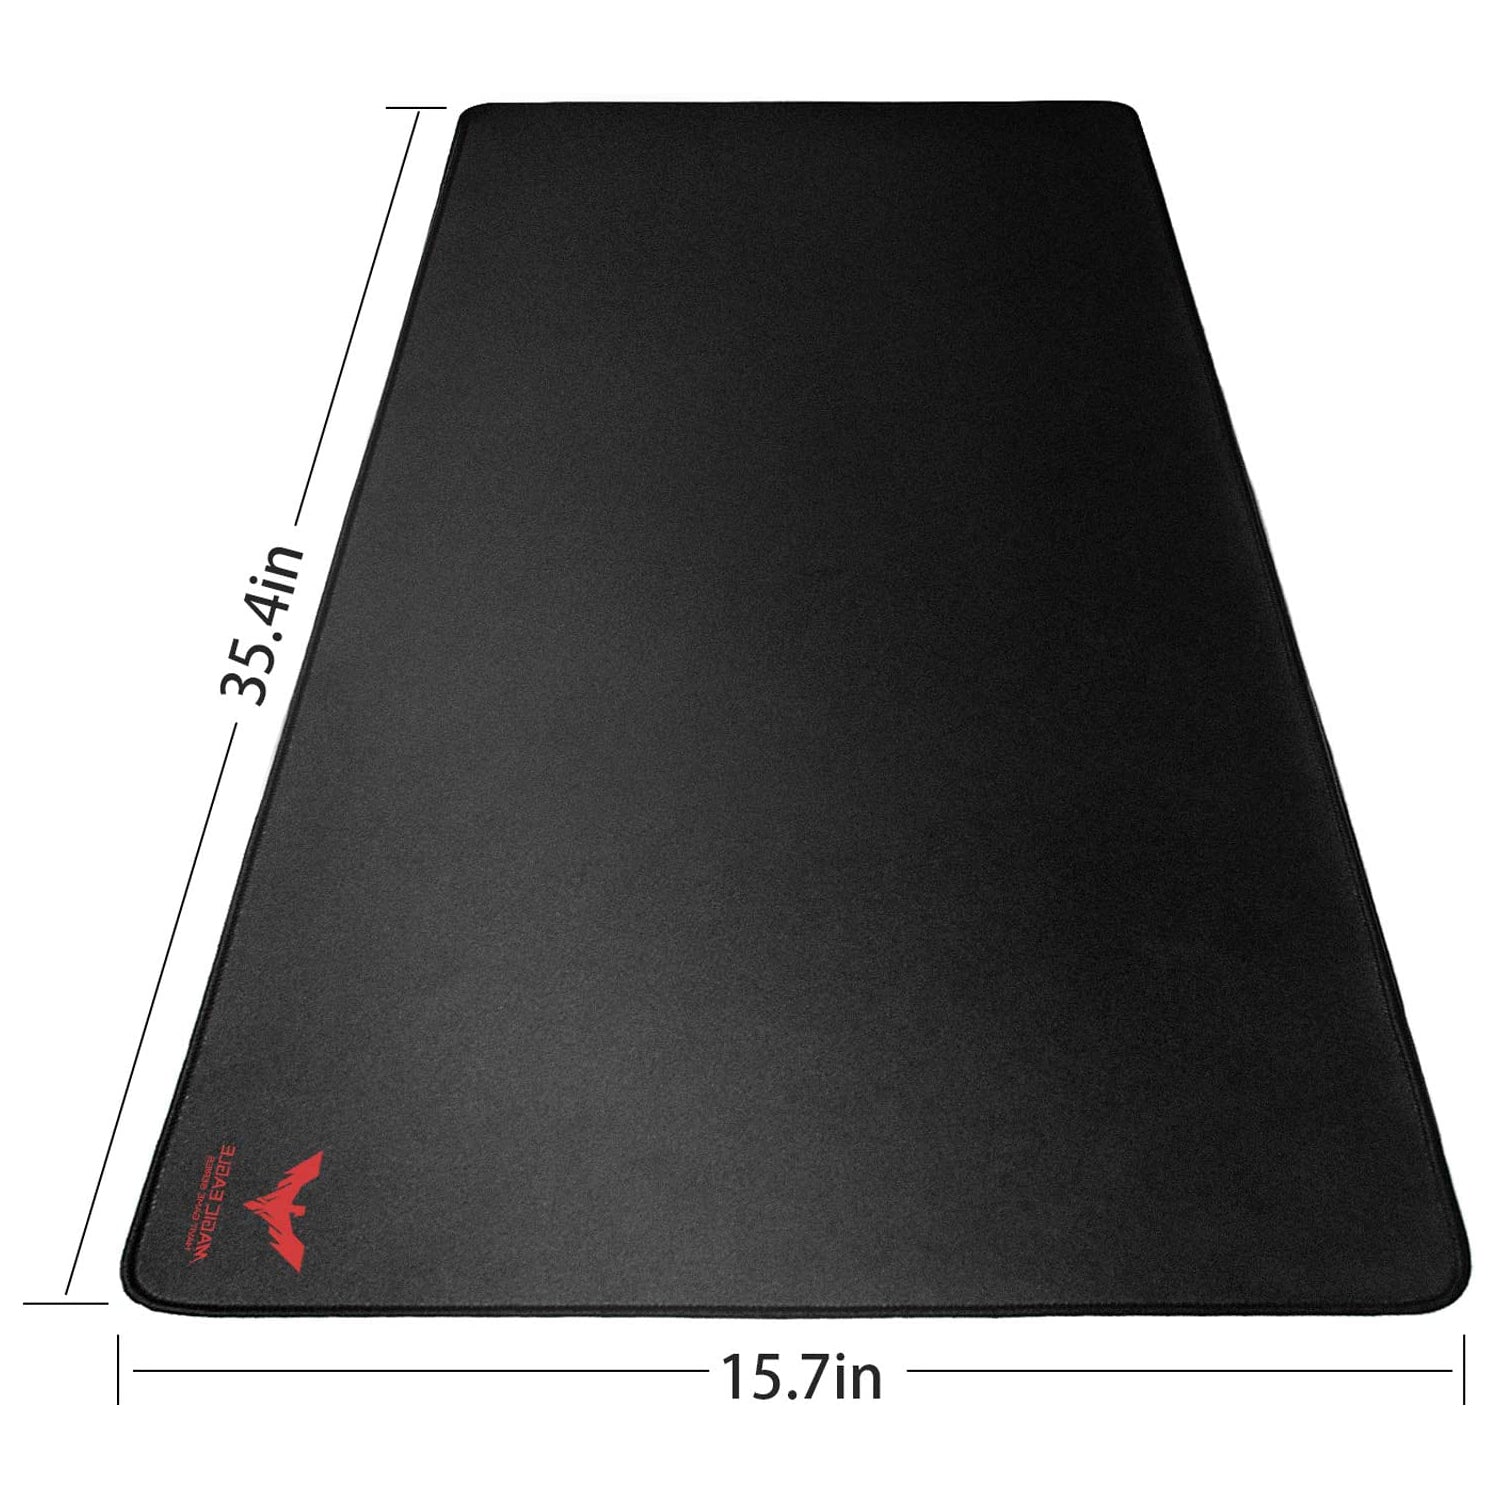 HAVIT HV-MP855 Extended Mouse Mat / Pad with Waterproof & Non-Slip Rubber Base